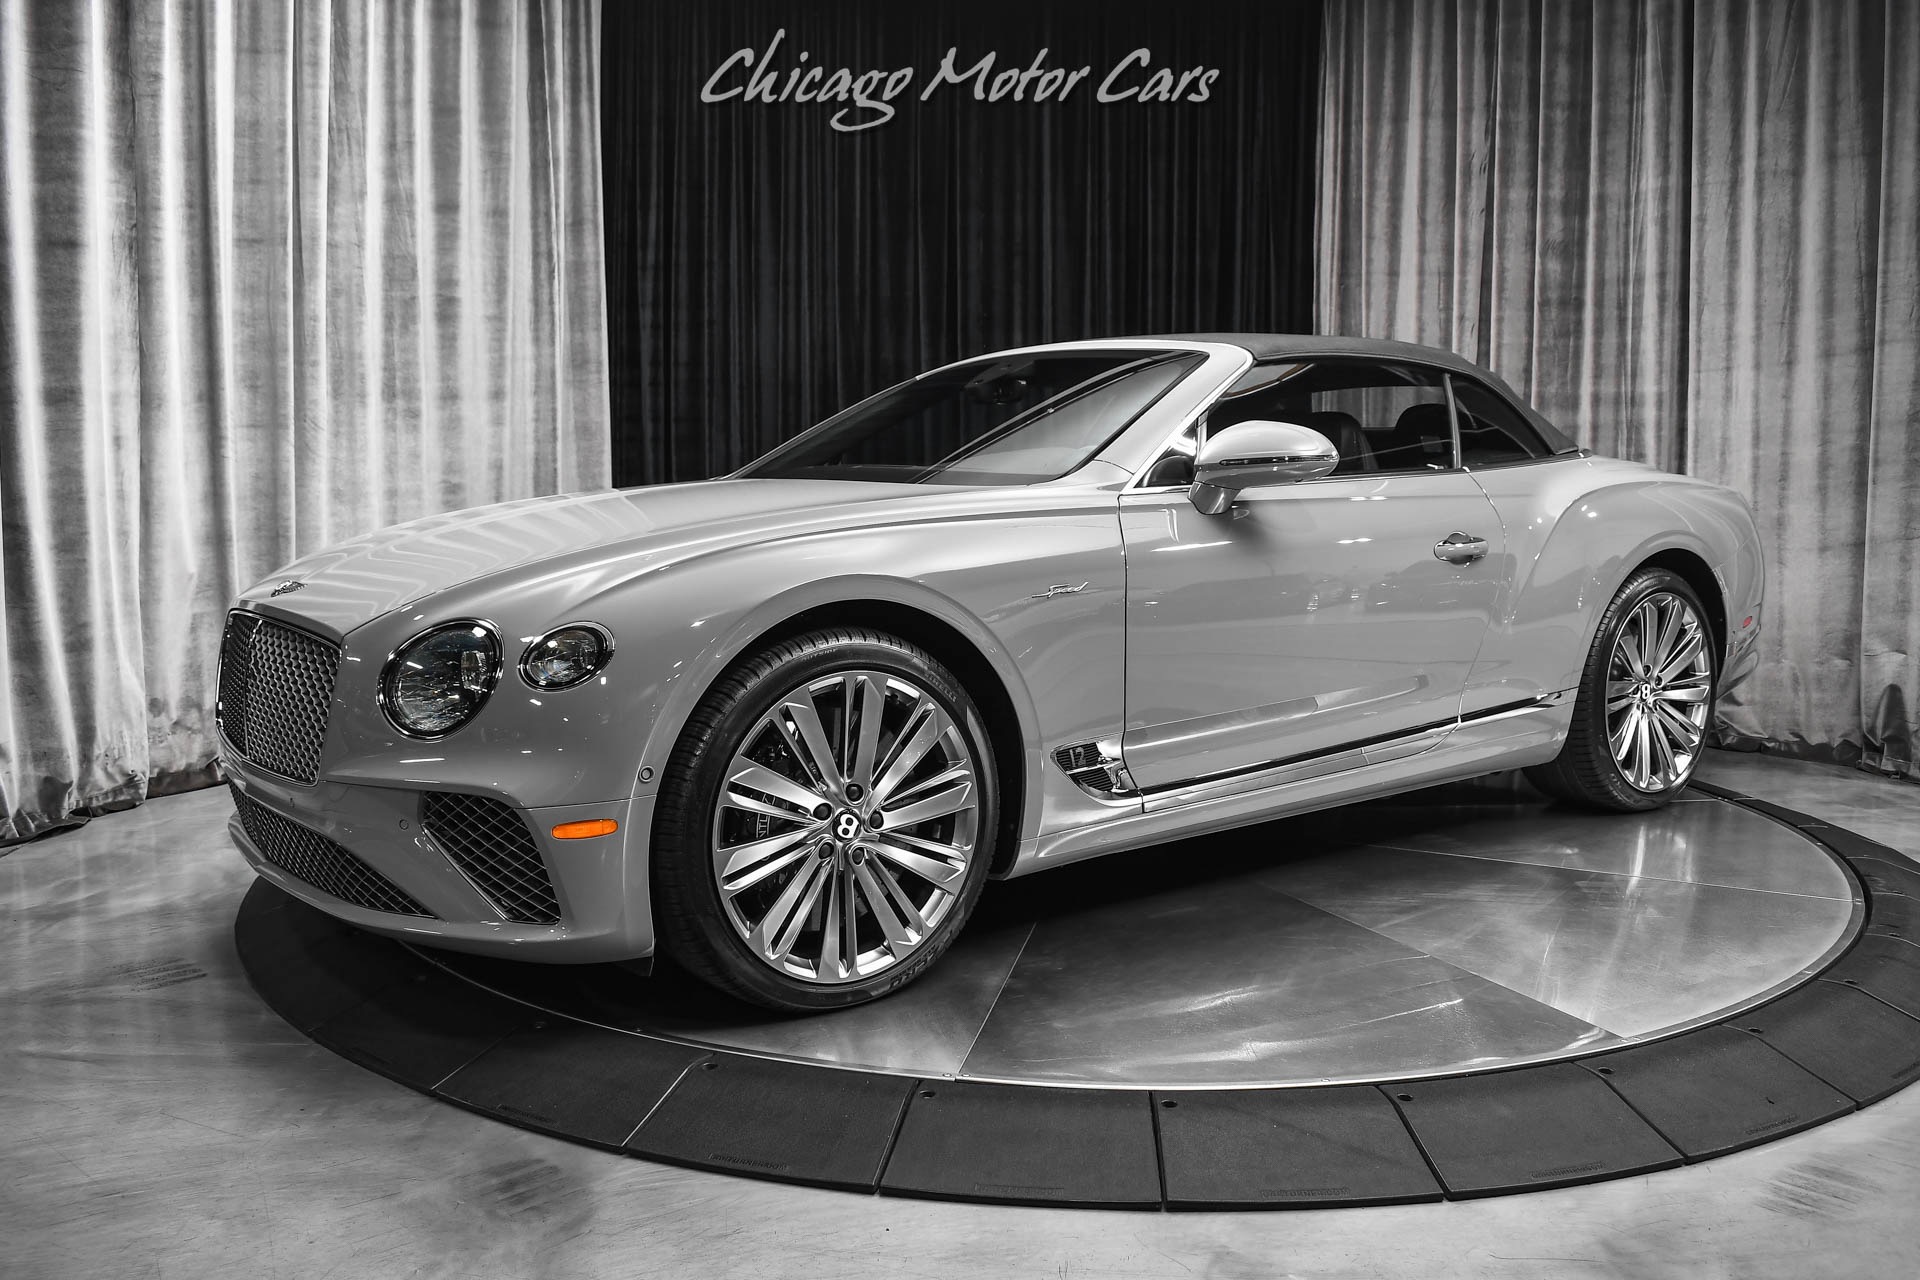 Used-2022-Bentley-Continental-GTC-Speed-Only-1200-Miles-357kMSRP-Ceramic-Brakes-Carbon-Fiber-Hot-Spec